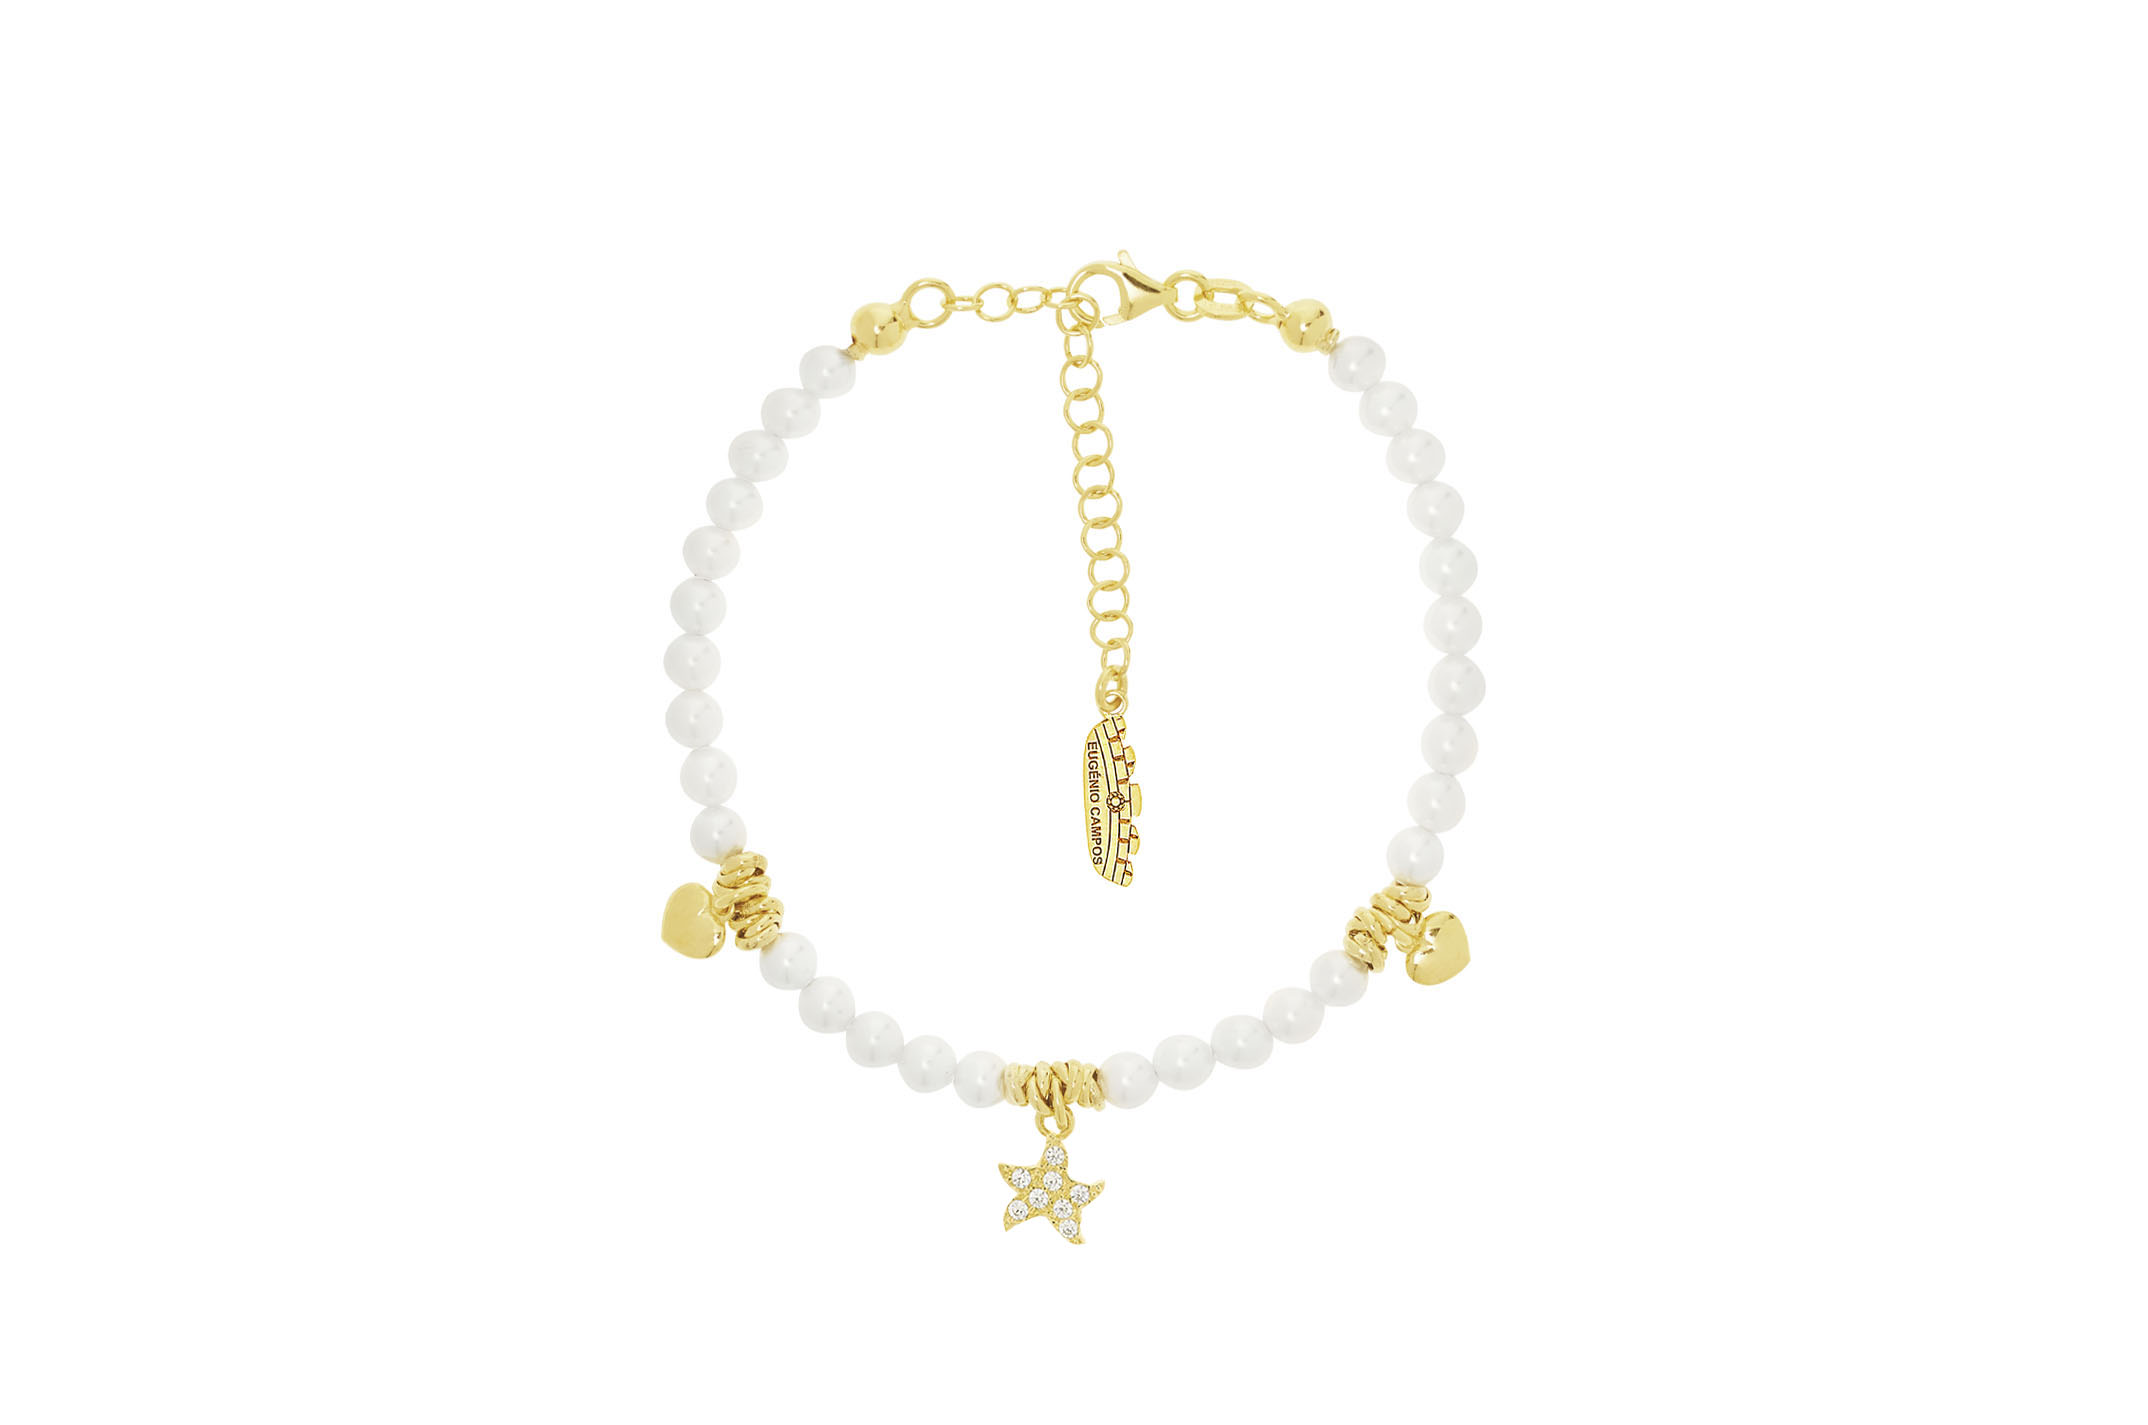 Jewel: bracelet;Material: silver 925;Weight: 10.8 gr;Stone: pearl & zirconia;Color: yellow;Size: 16 cm + 5 cm;Pendent size: 0.5 cm